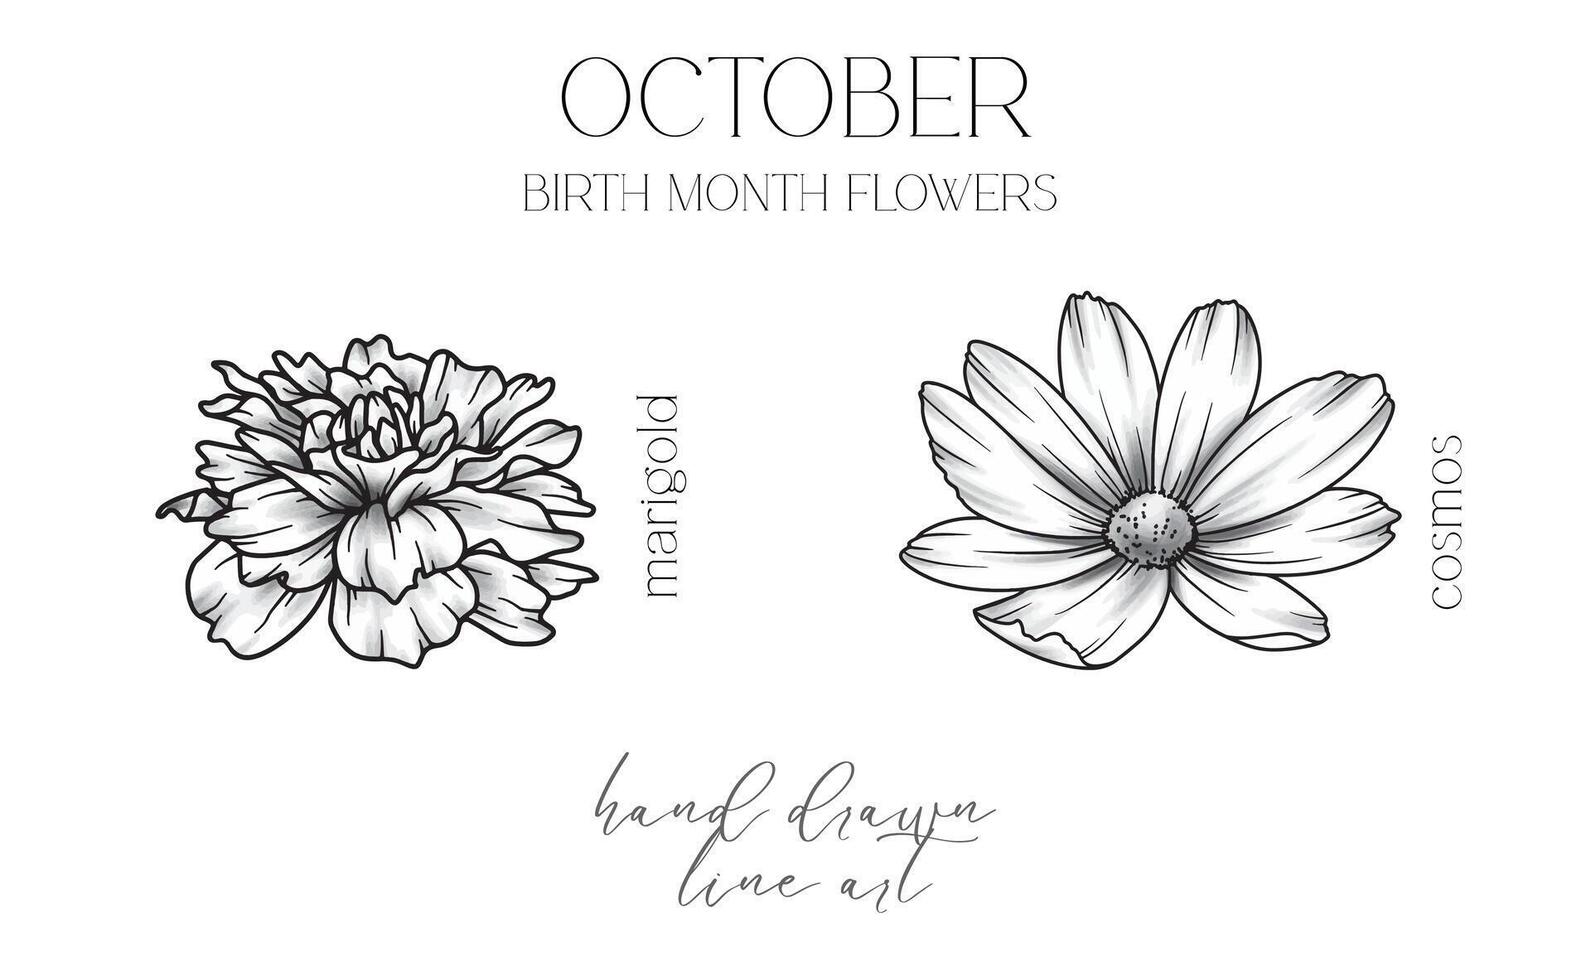 Ocrober Birth Month Flowers. Marigold outline isolated on white. Cosmos Line Art. Hand drawn line art botanical illustration. Black and White Flowers vector